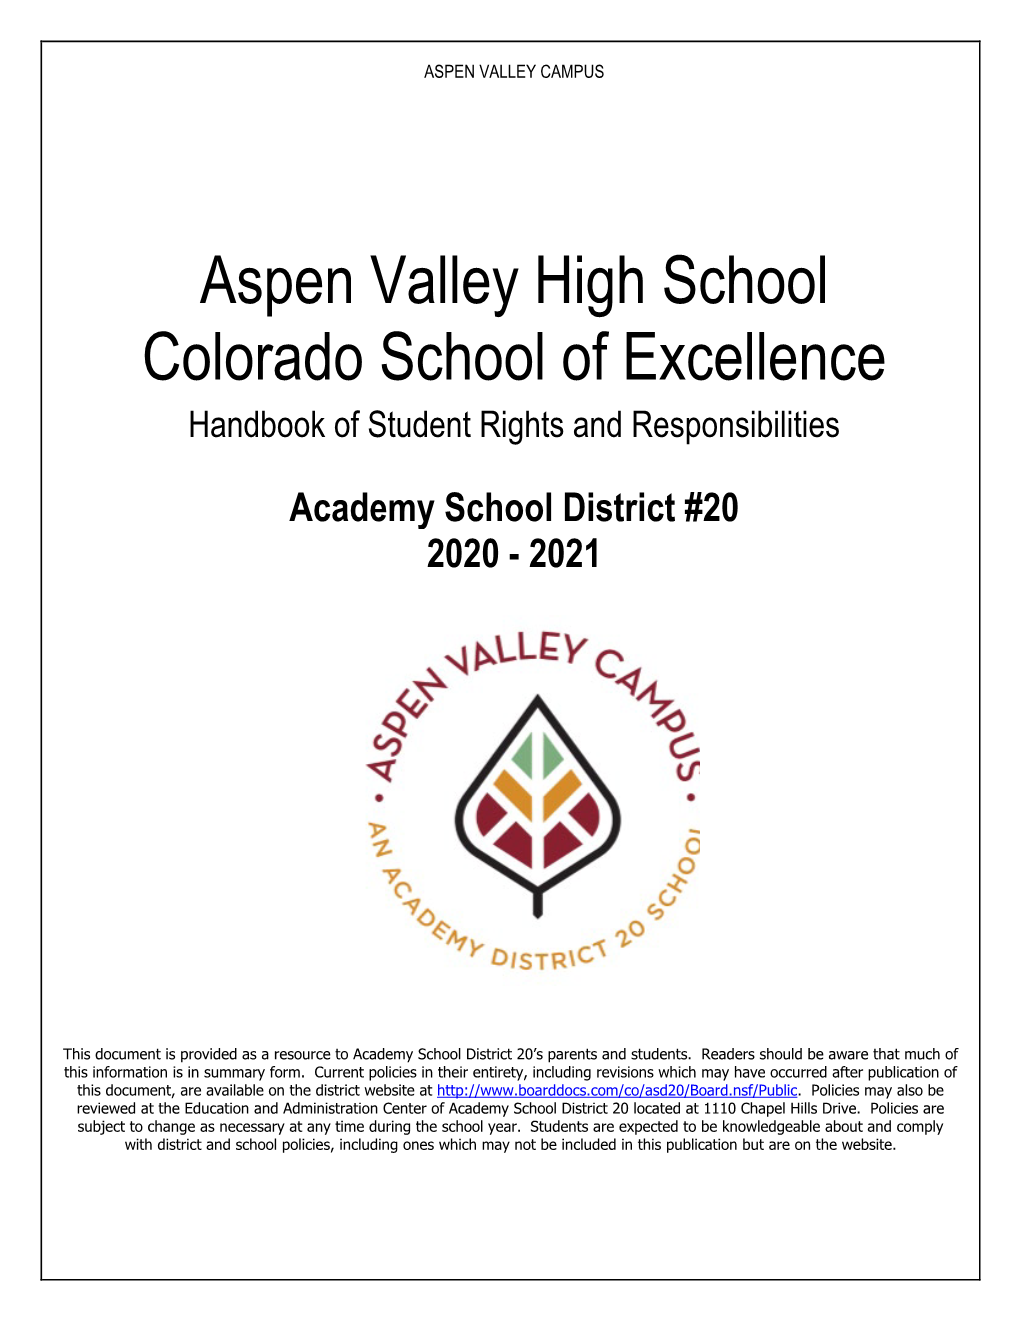 Aspen Valley High School Colorado School of Excellence Handbook of Student Rights and Responsibilities